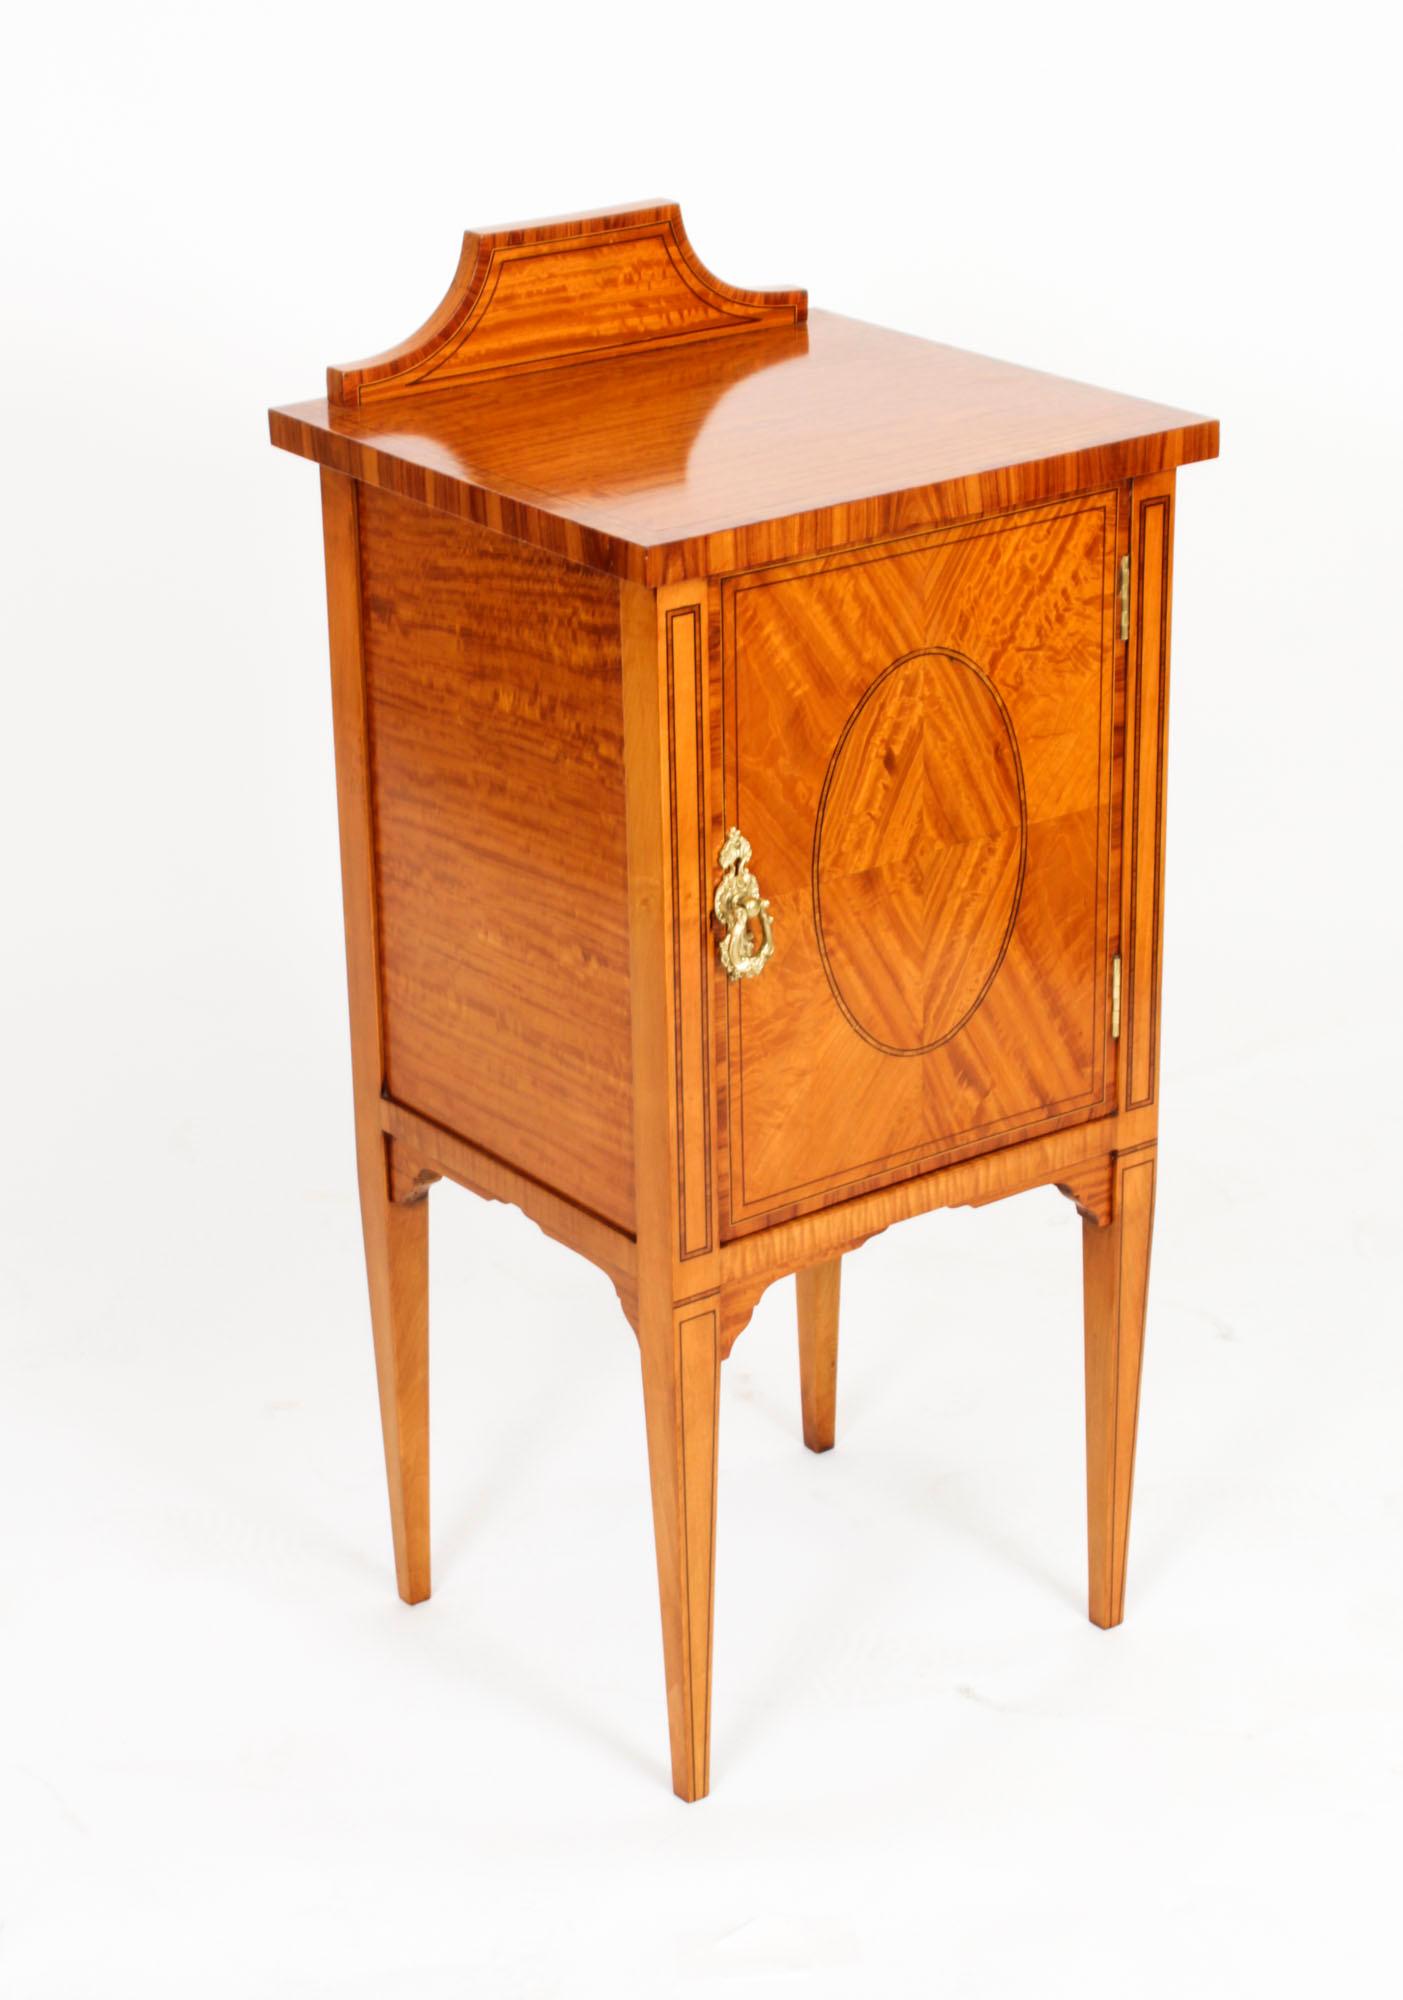 Antique Inlaid Satinwood Bedside Cabinet c.1880 19th Century 8